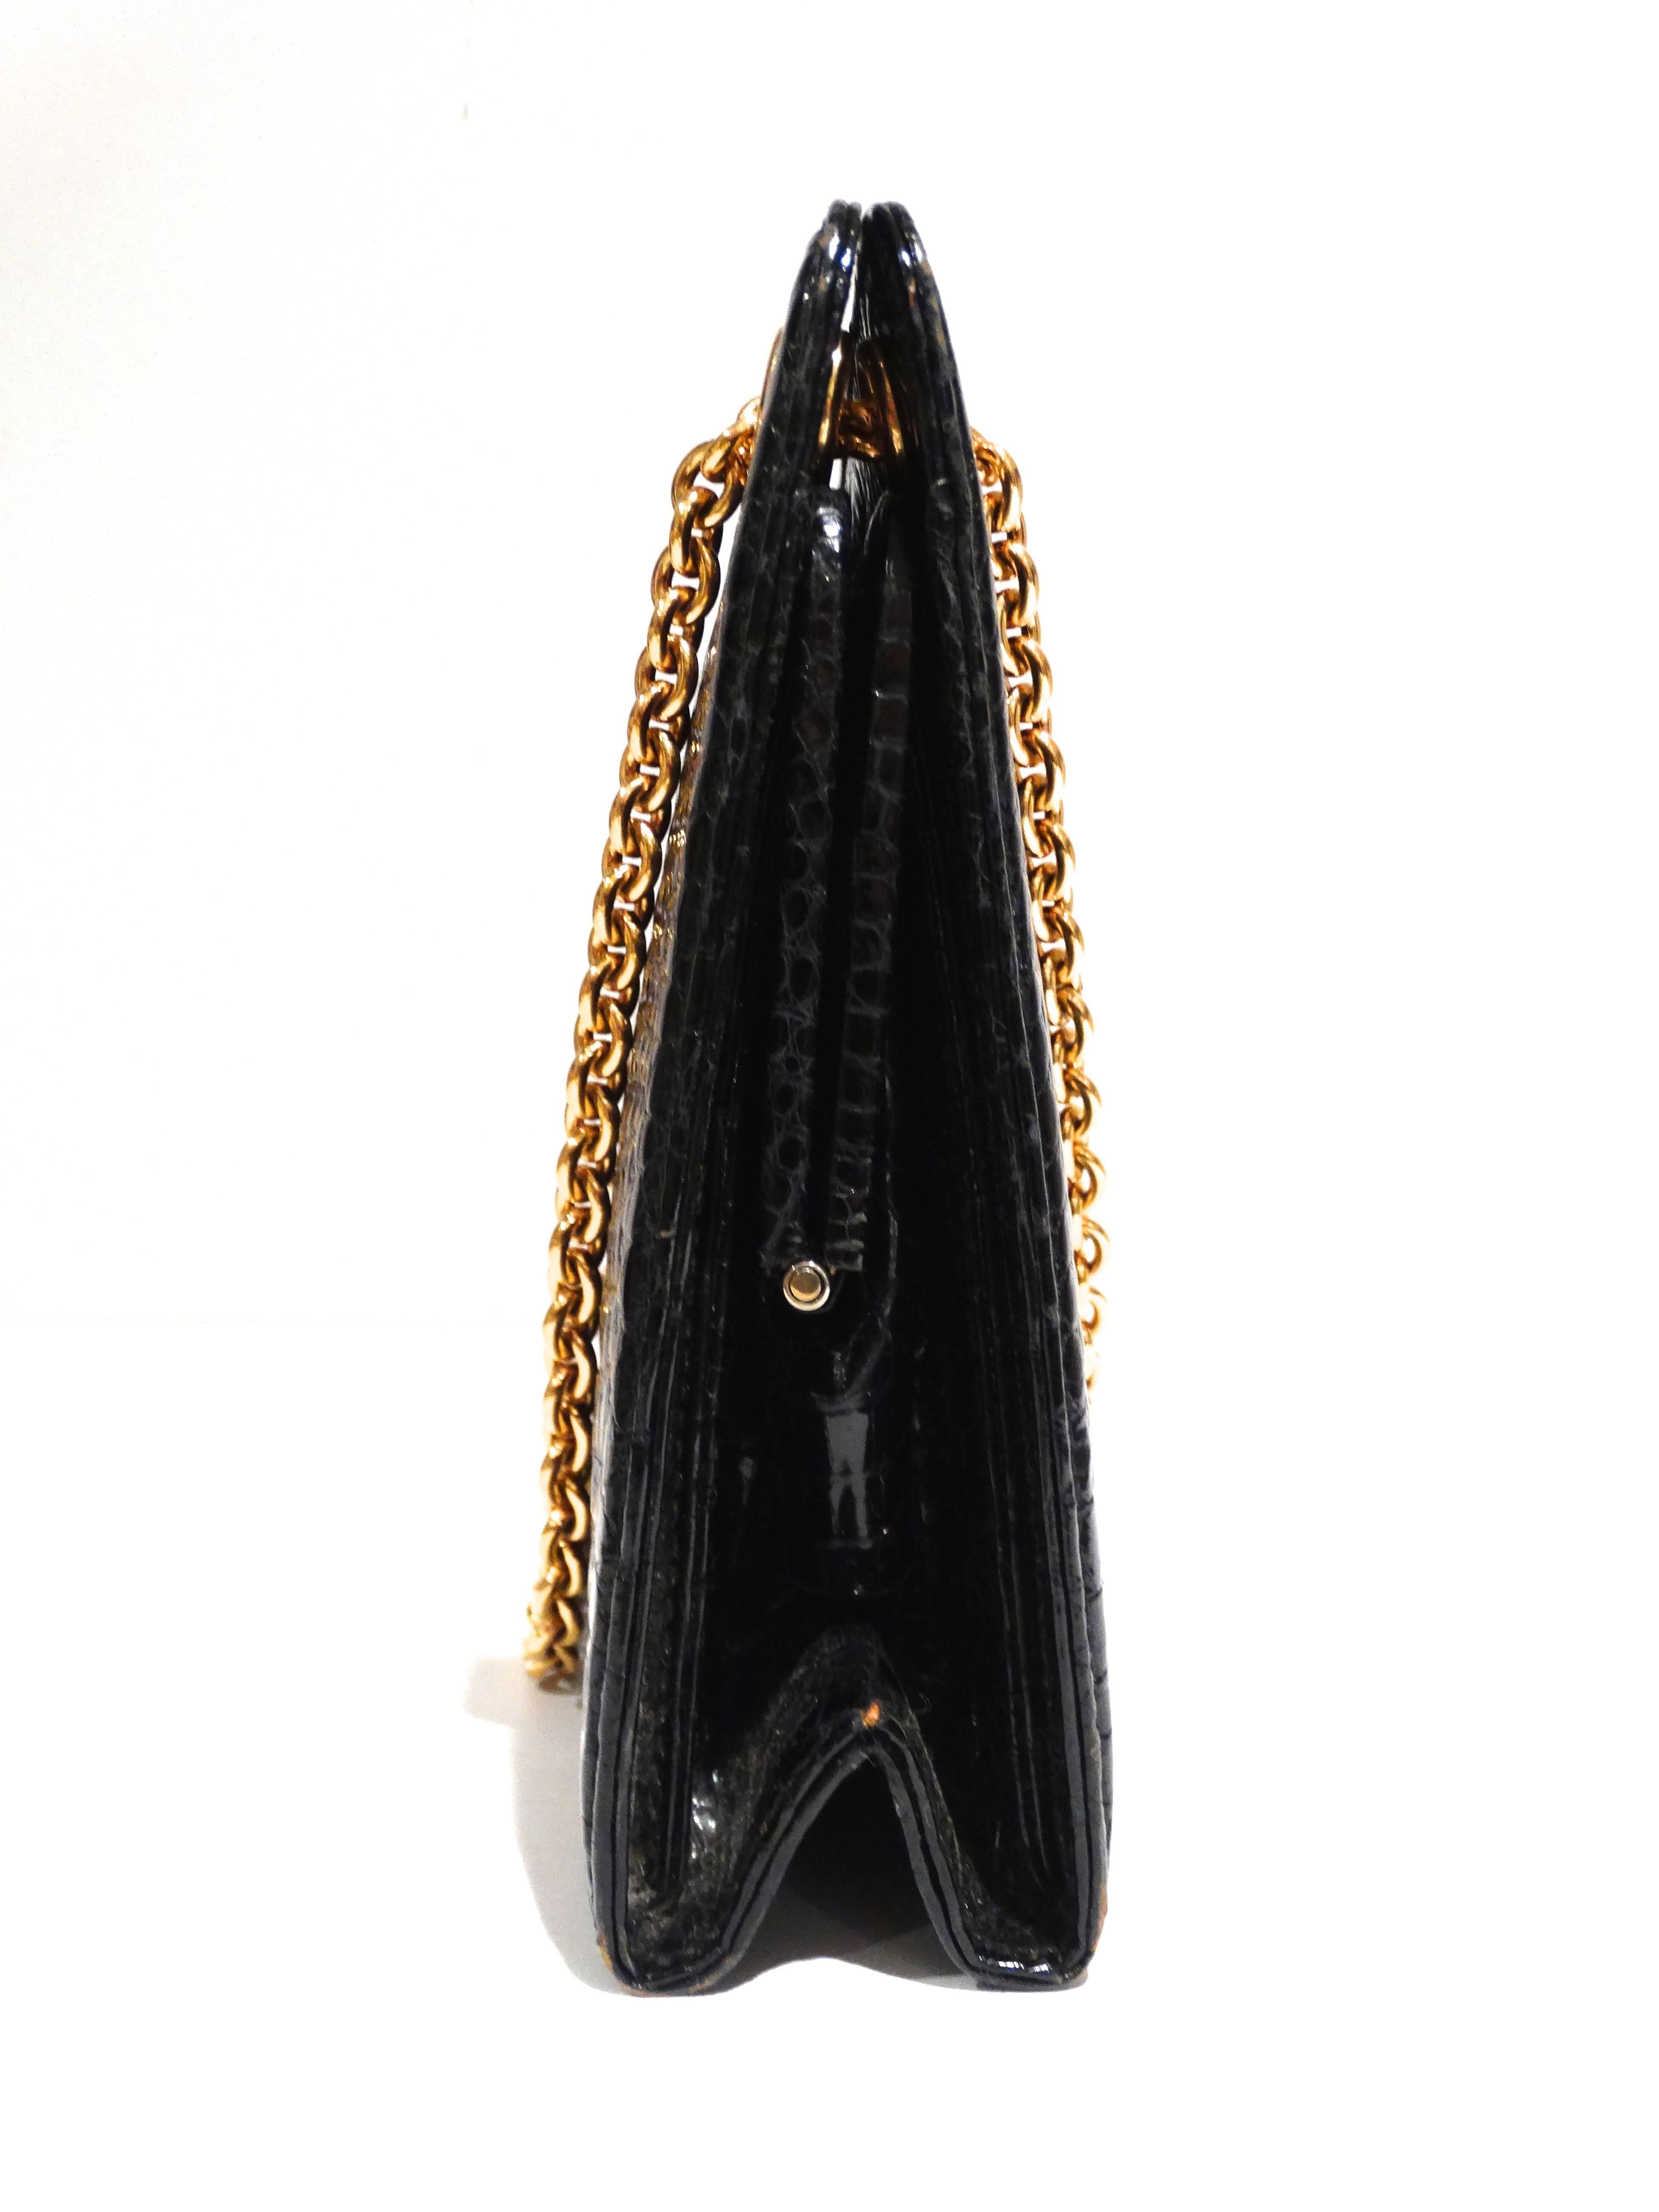 This is a rare vintage black crocodile skin handbag by Gucci, from the 1950's. It has a double chain handle which is 7